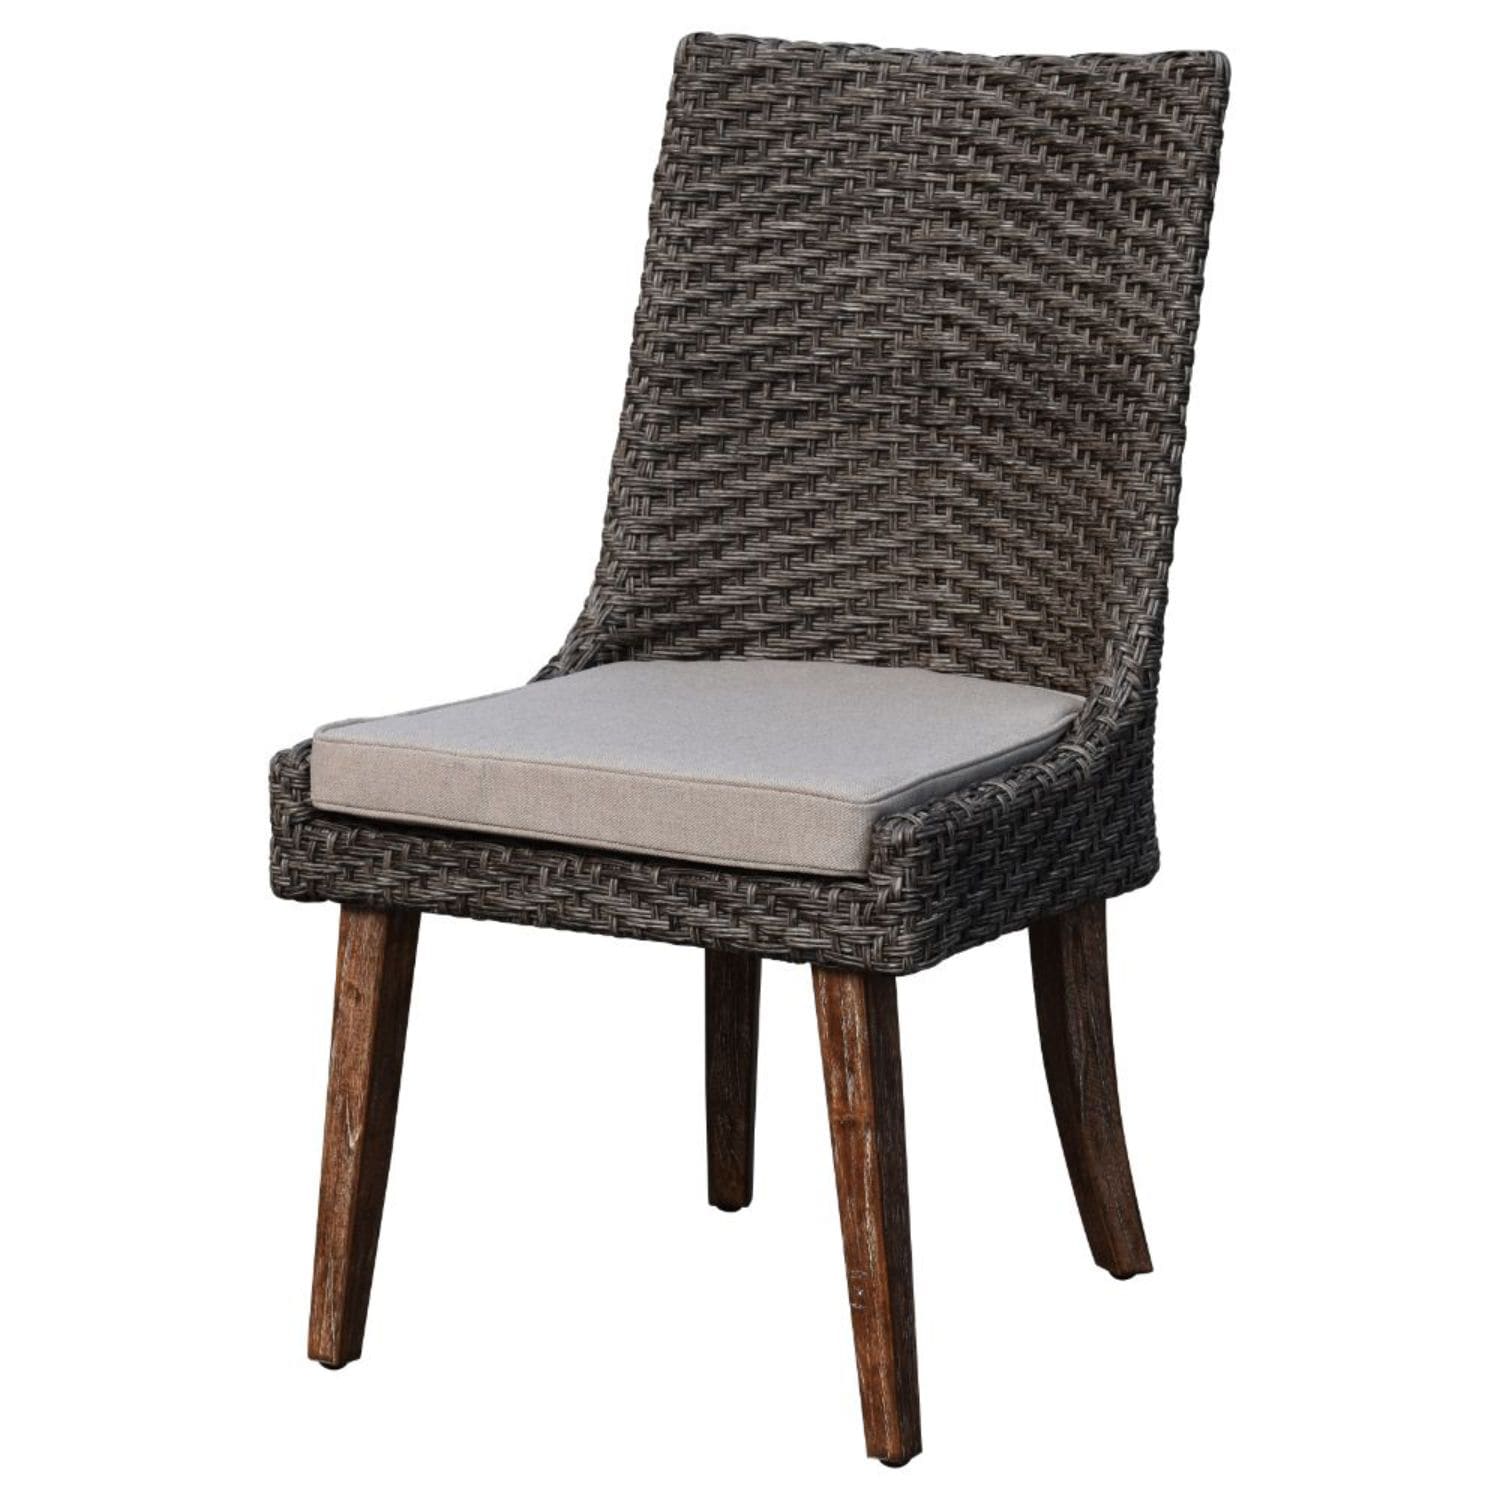 Bermuda Set of 2 Woven Taupe/Grey Wood Frame Stationary Dining Chair(s) with Tan Sunbrella Woven Seat | - Courtyard Casual 5193